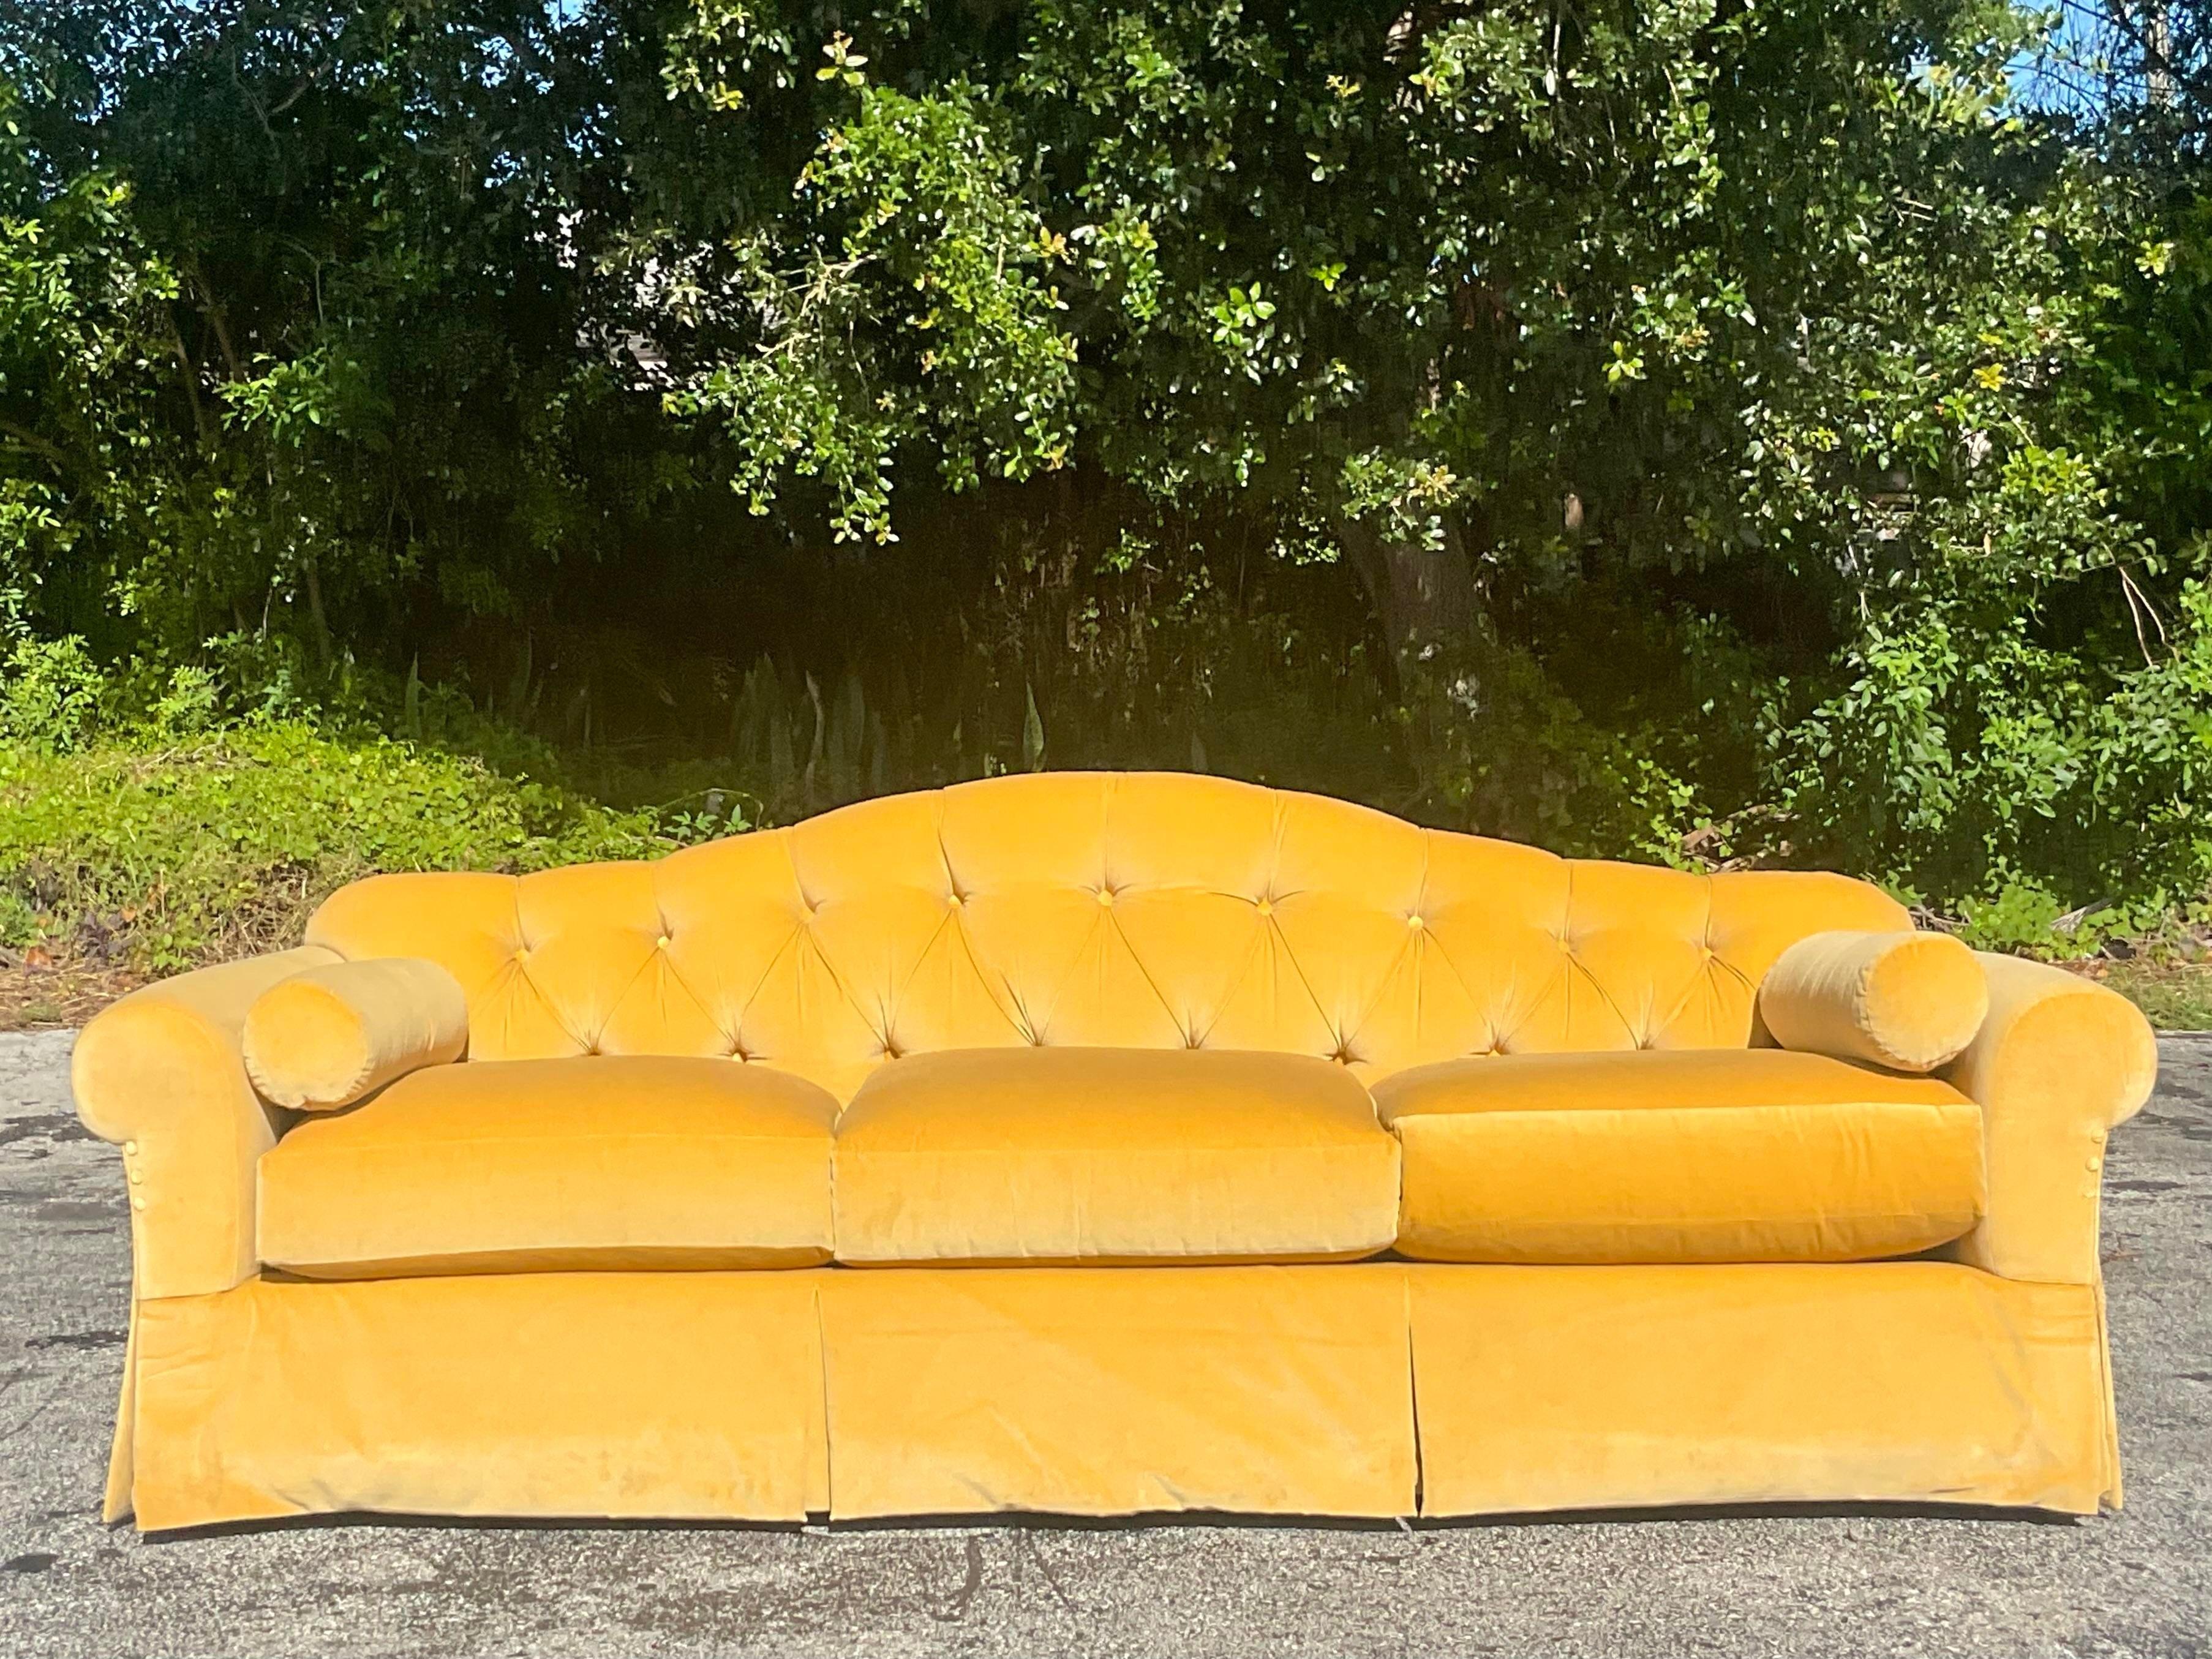 A stunning vintage Regency sofa. Made by the iconic Baker group and tagged below the seat. A brilliant yellow velvet and chic tufted detail. Acquired from a Palm a each estate.